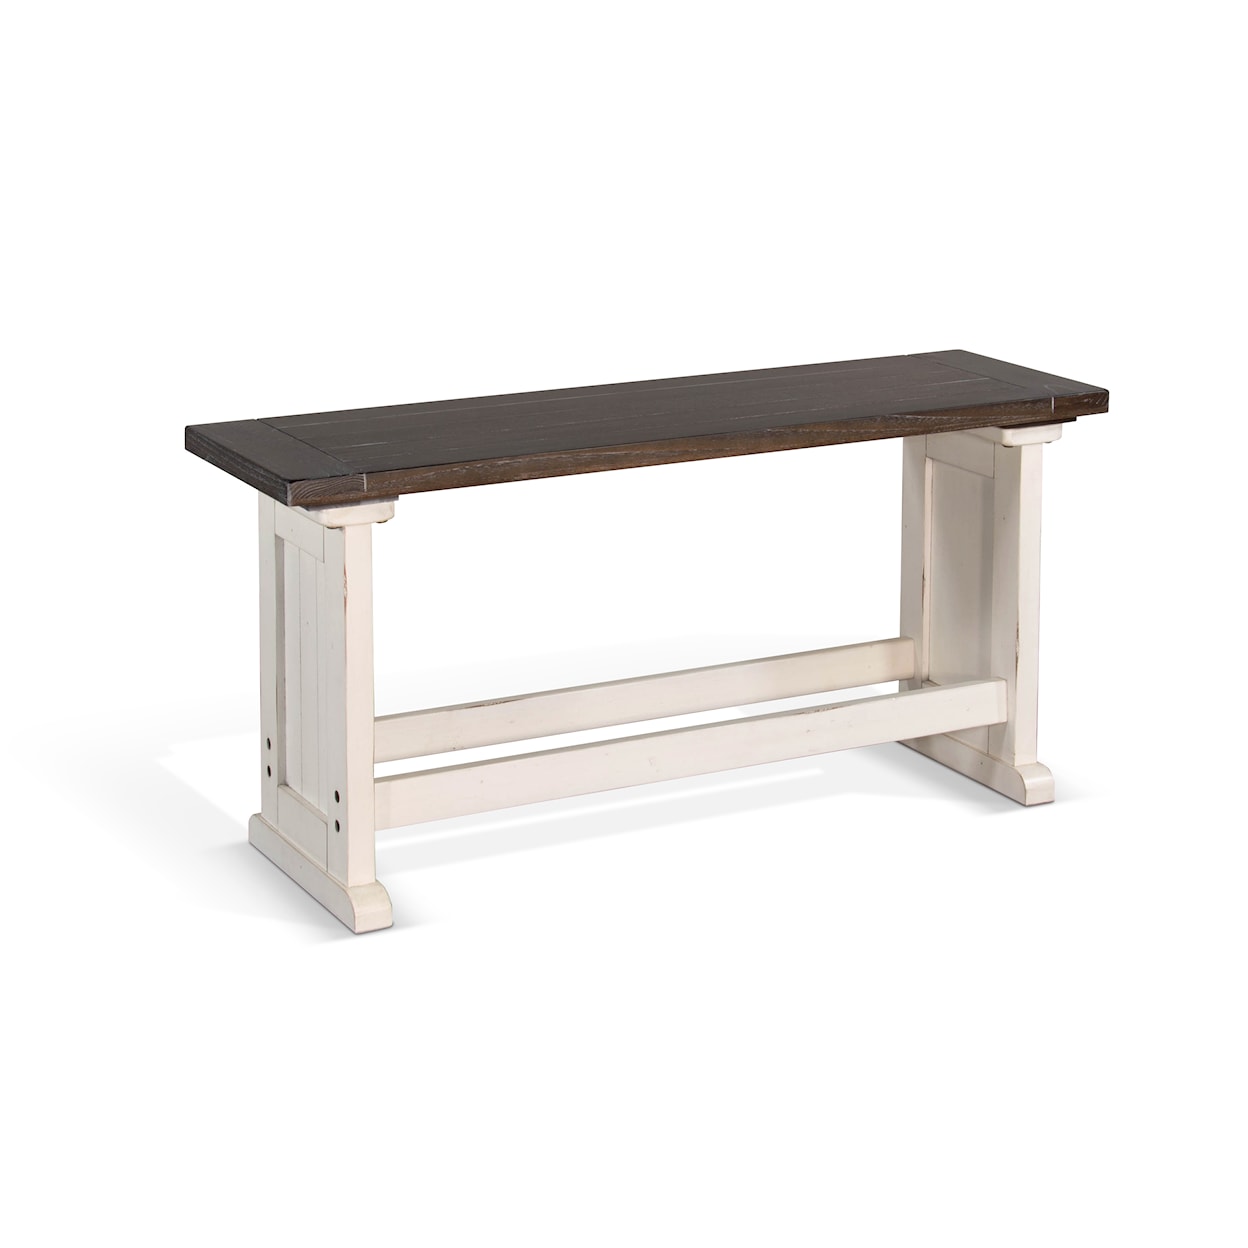 Sunny Designs Carriage House Counter Side Bench, Wood Seat